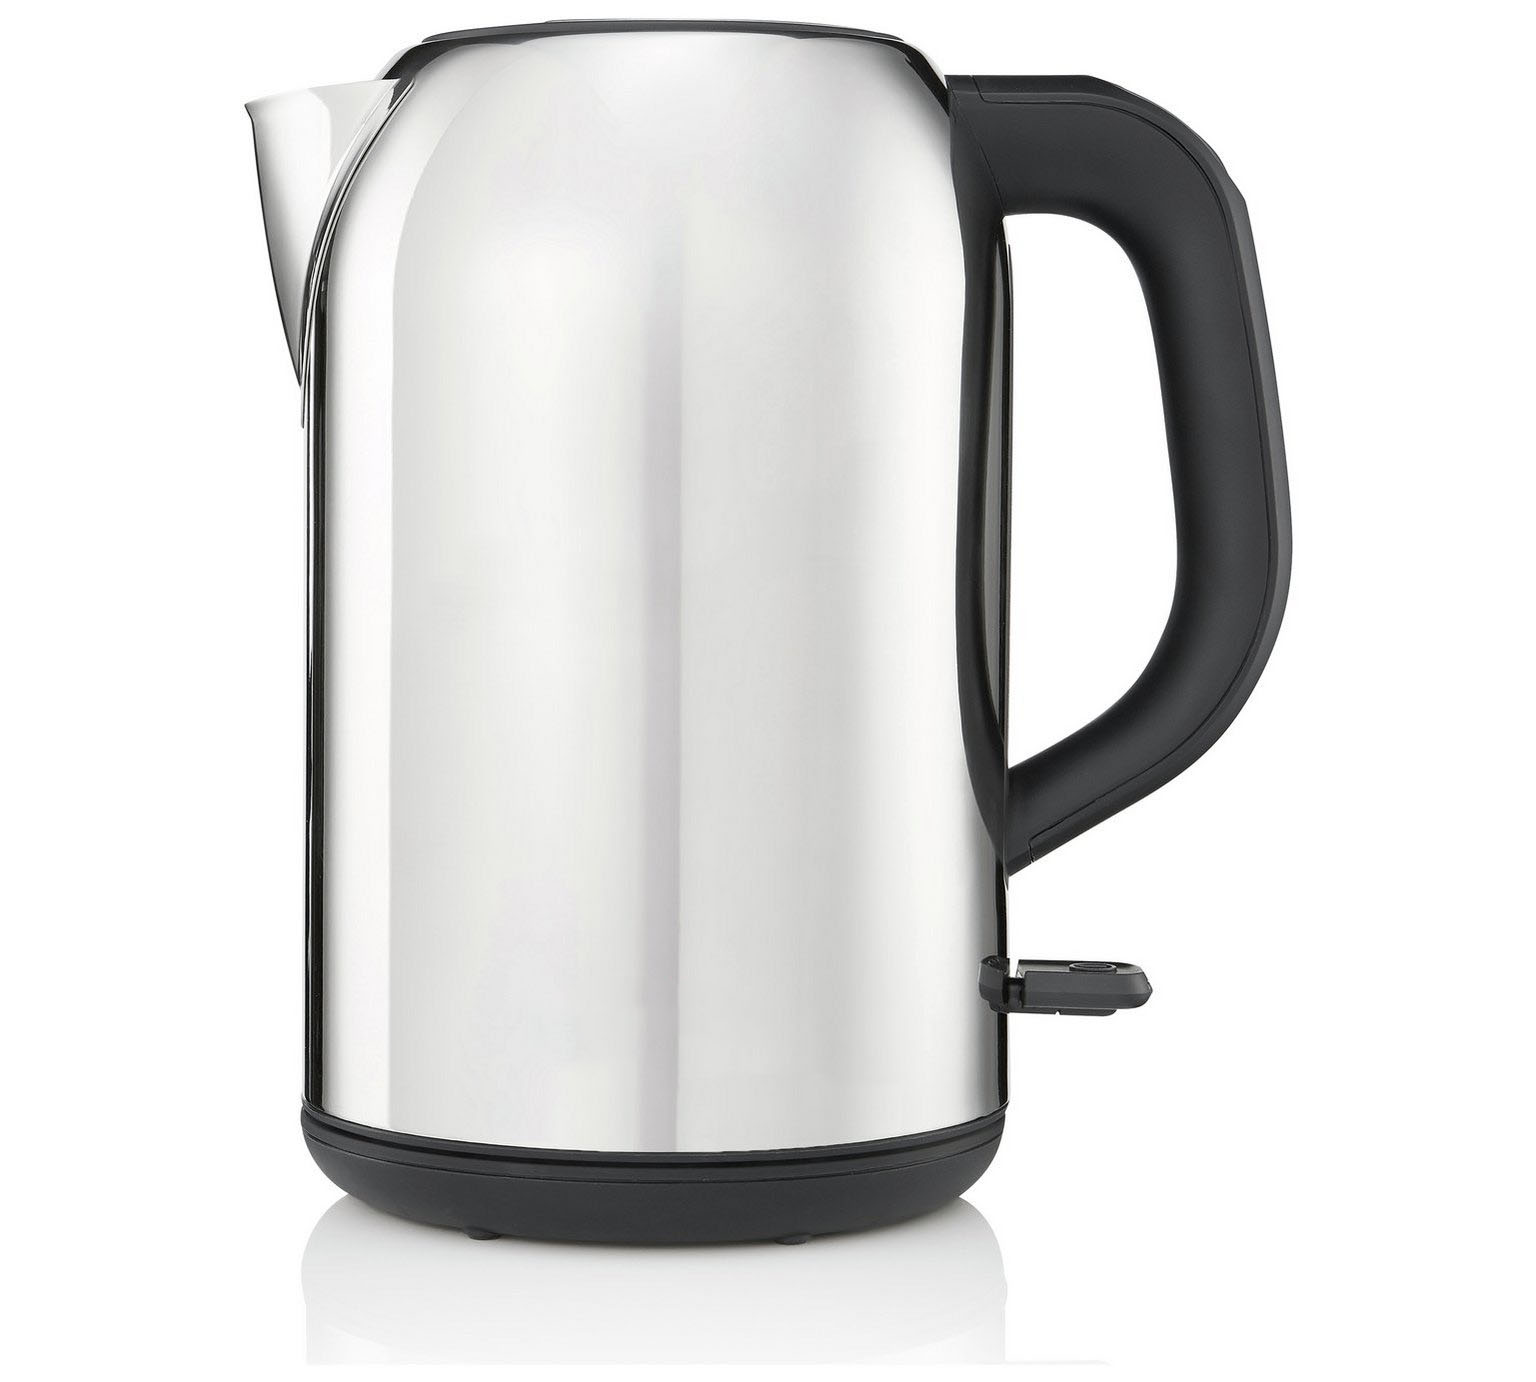 Jug Kettle - Polished Stainless Steel